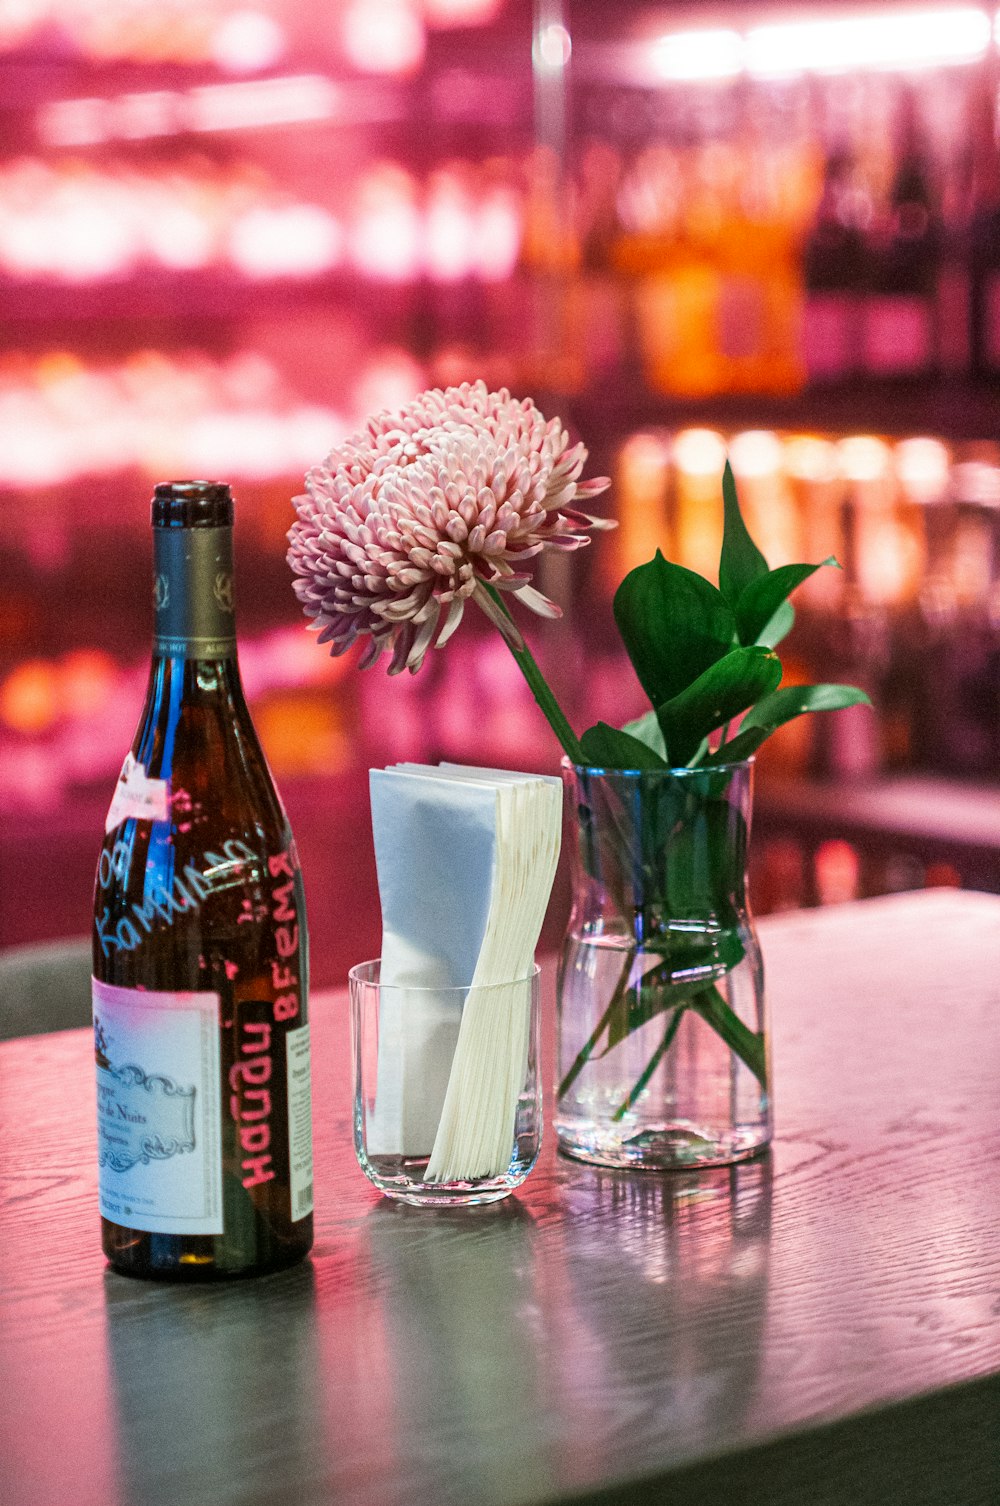 a bottle of beer and a vase of flowers on a table